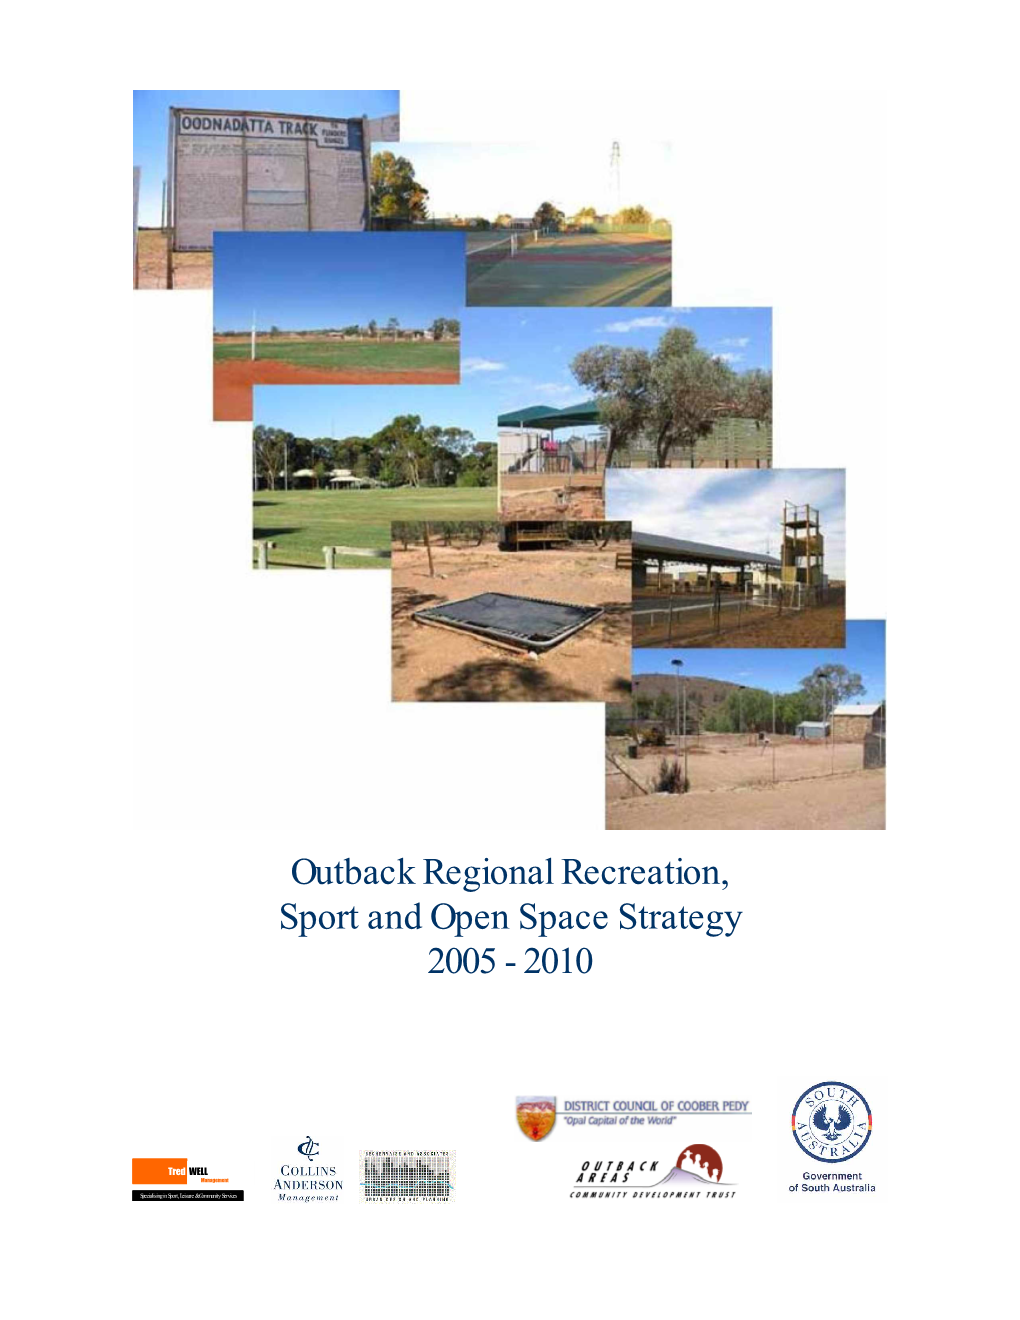 Outback Regional Recreation, Sport and Open Space Strategy 2005 - 2010